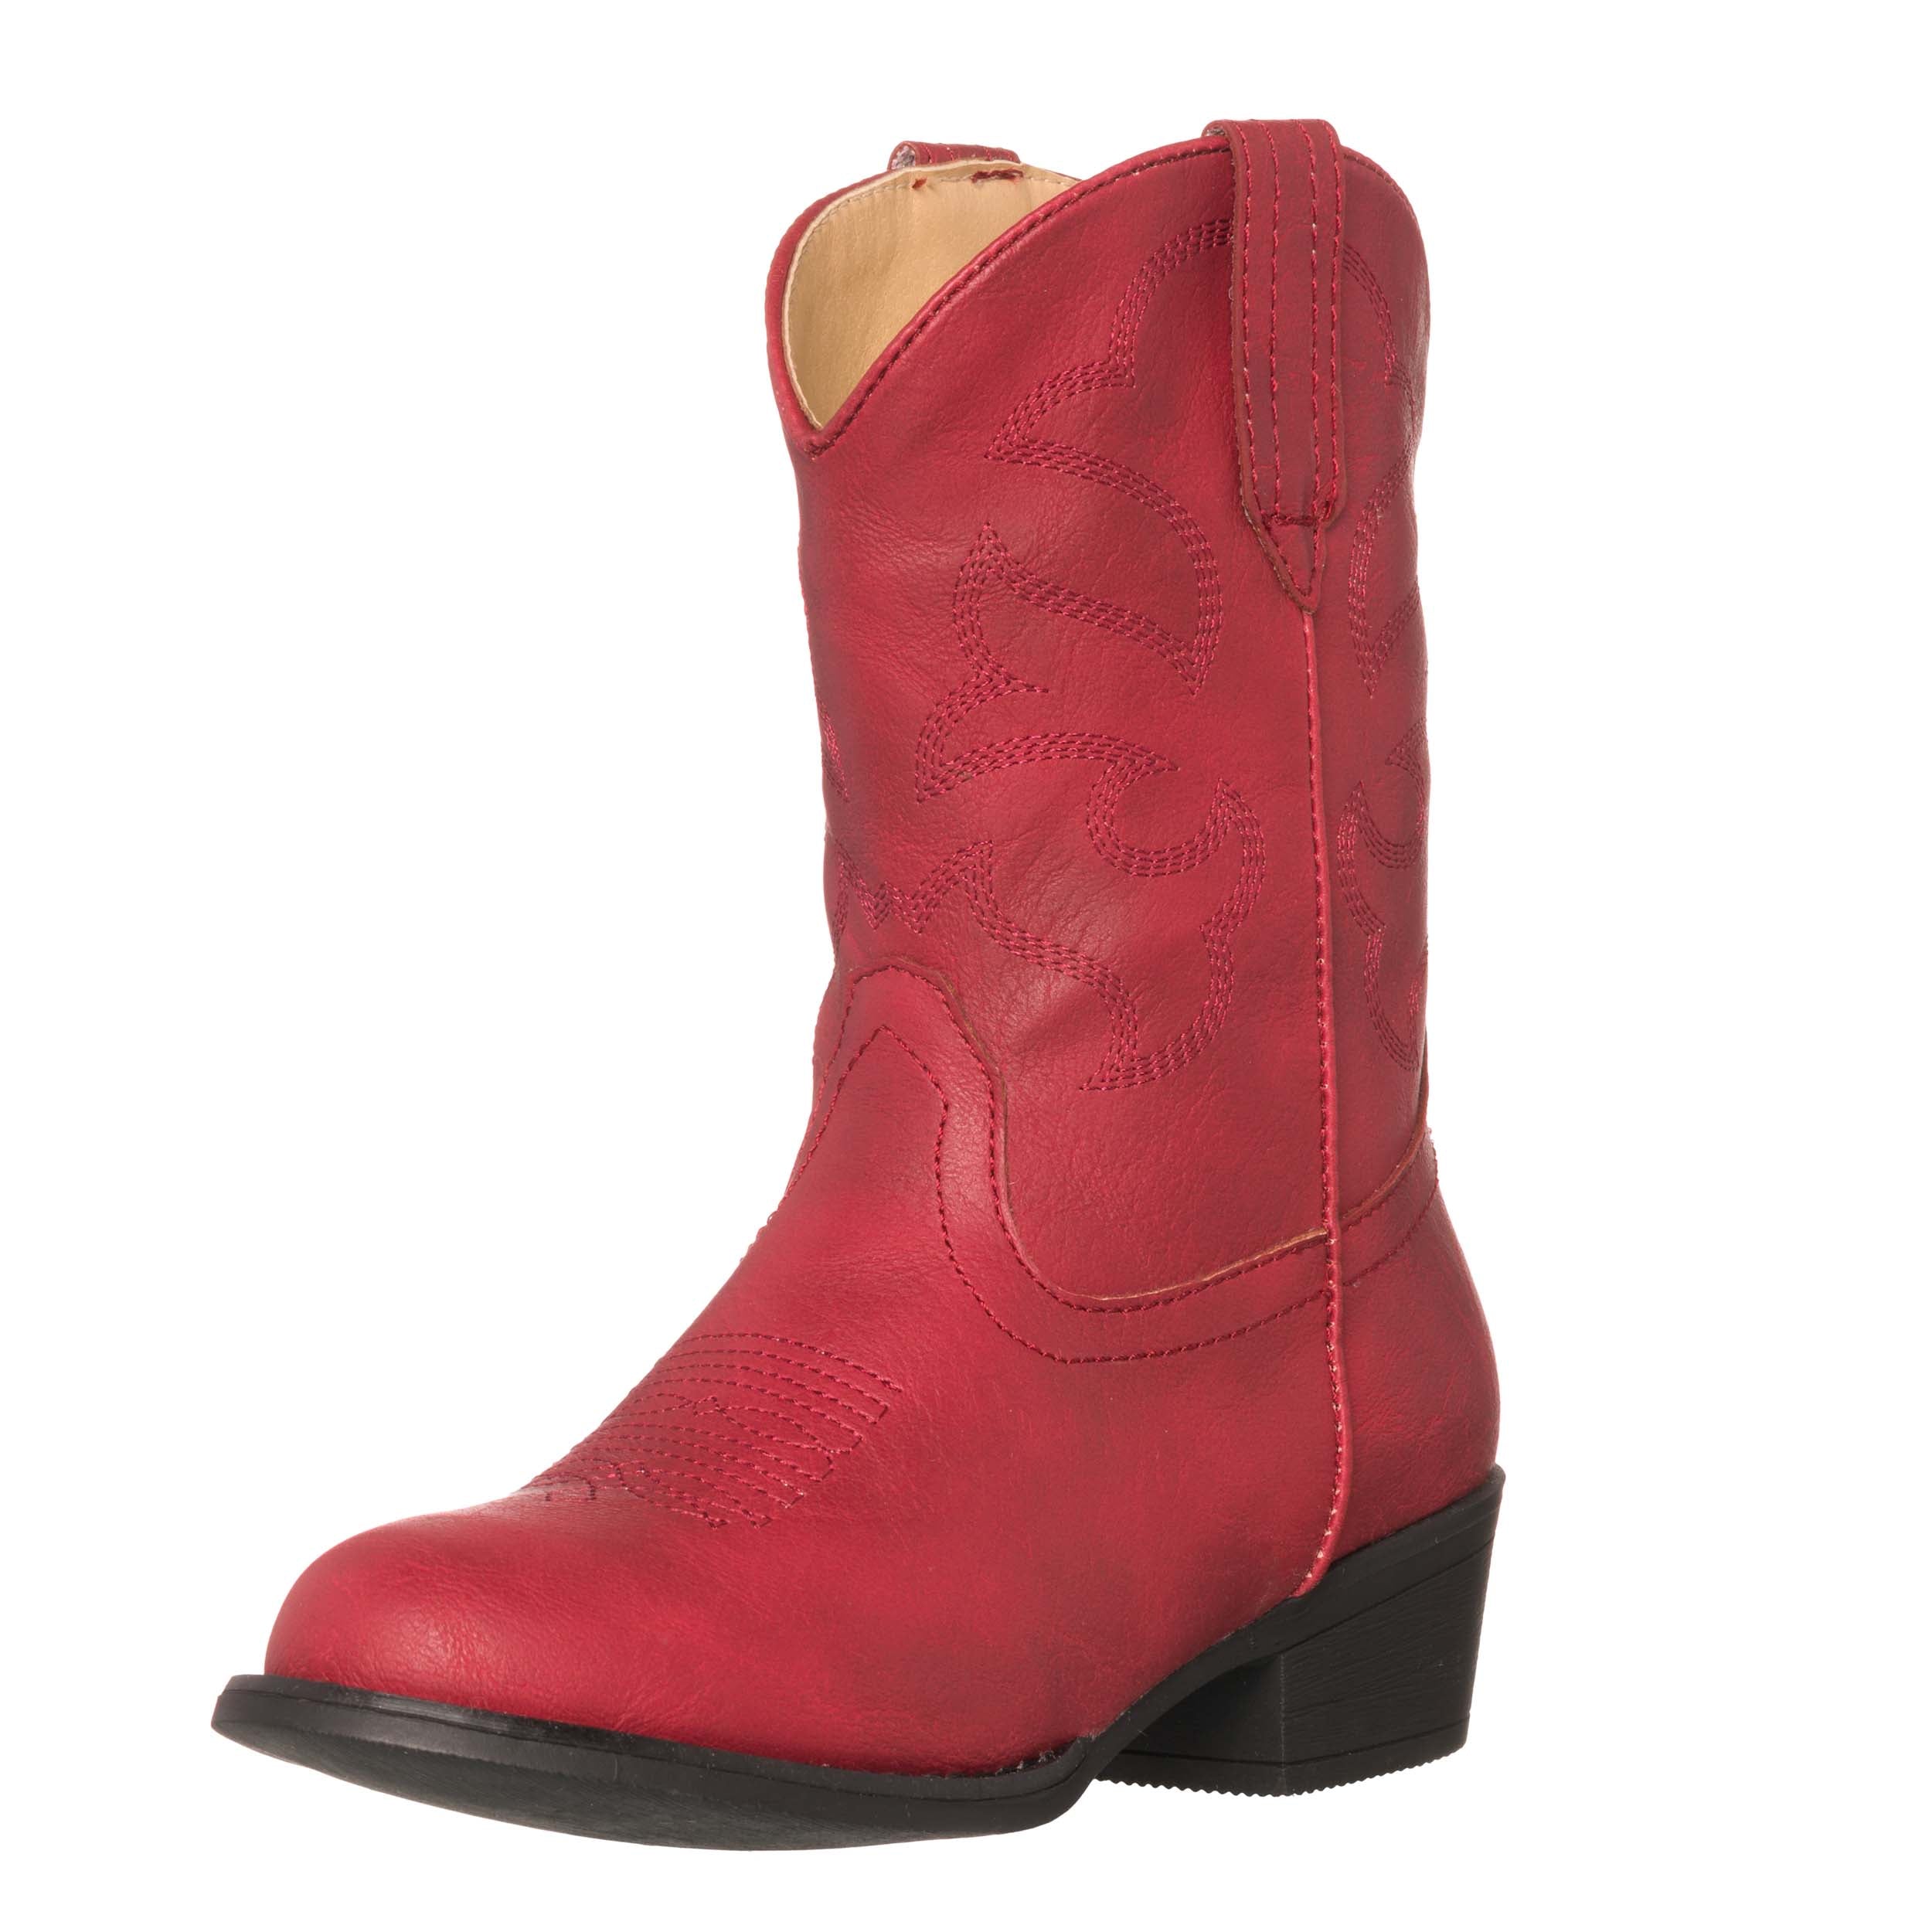 Children Western Cowboy Boot | Monterey Red for by Silver C Silver Canyon and Clothing Company